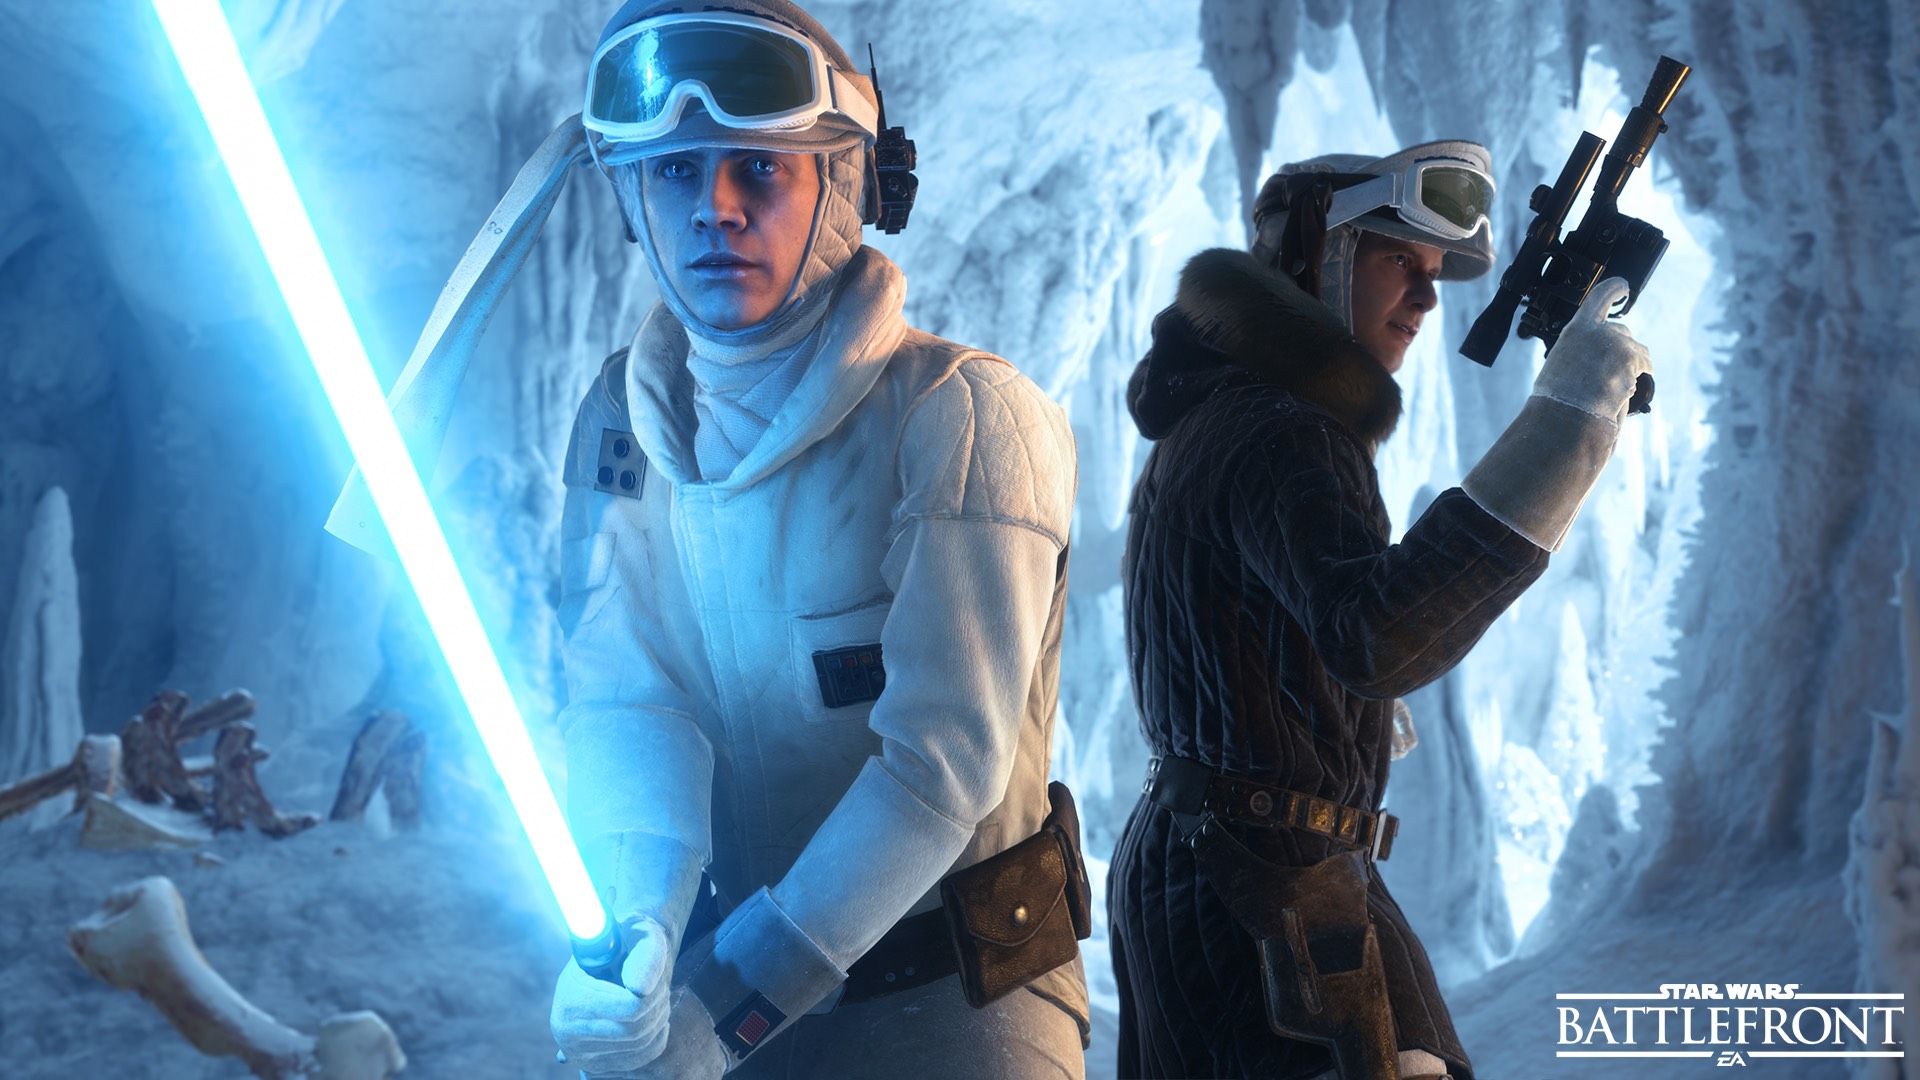 Discuss Everything About Star Wars Battlefront